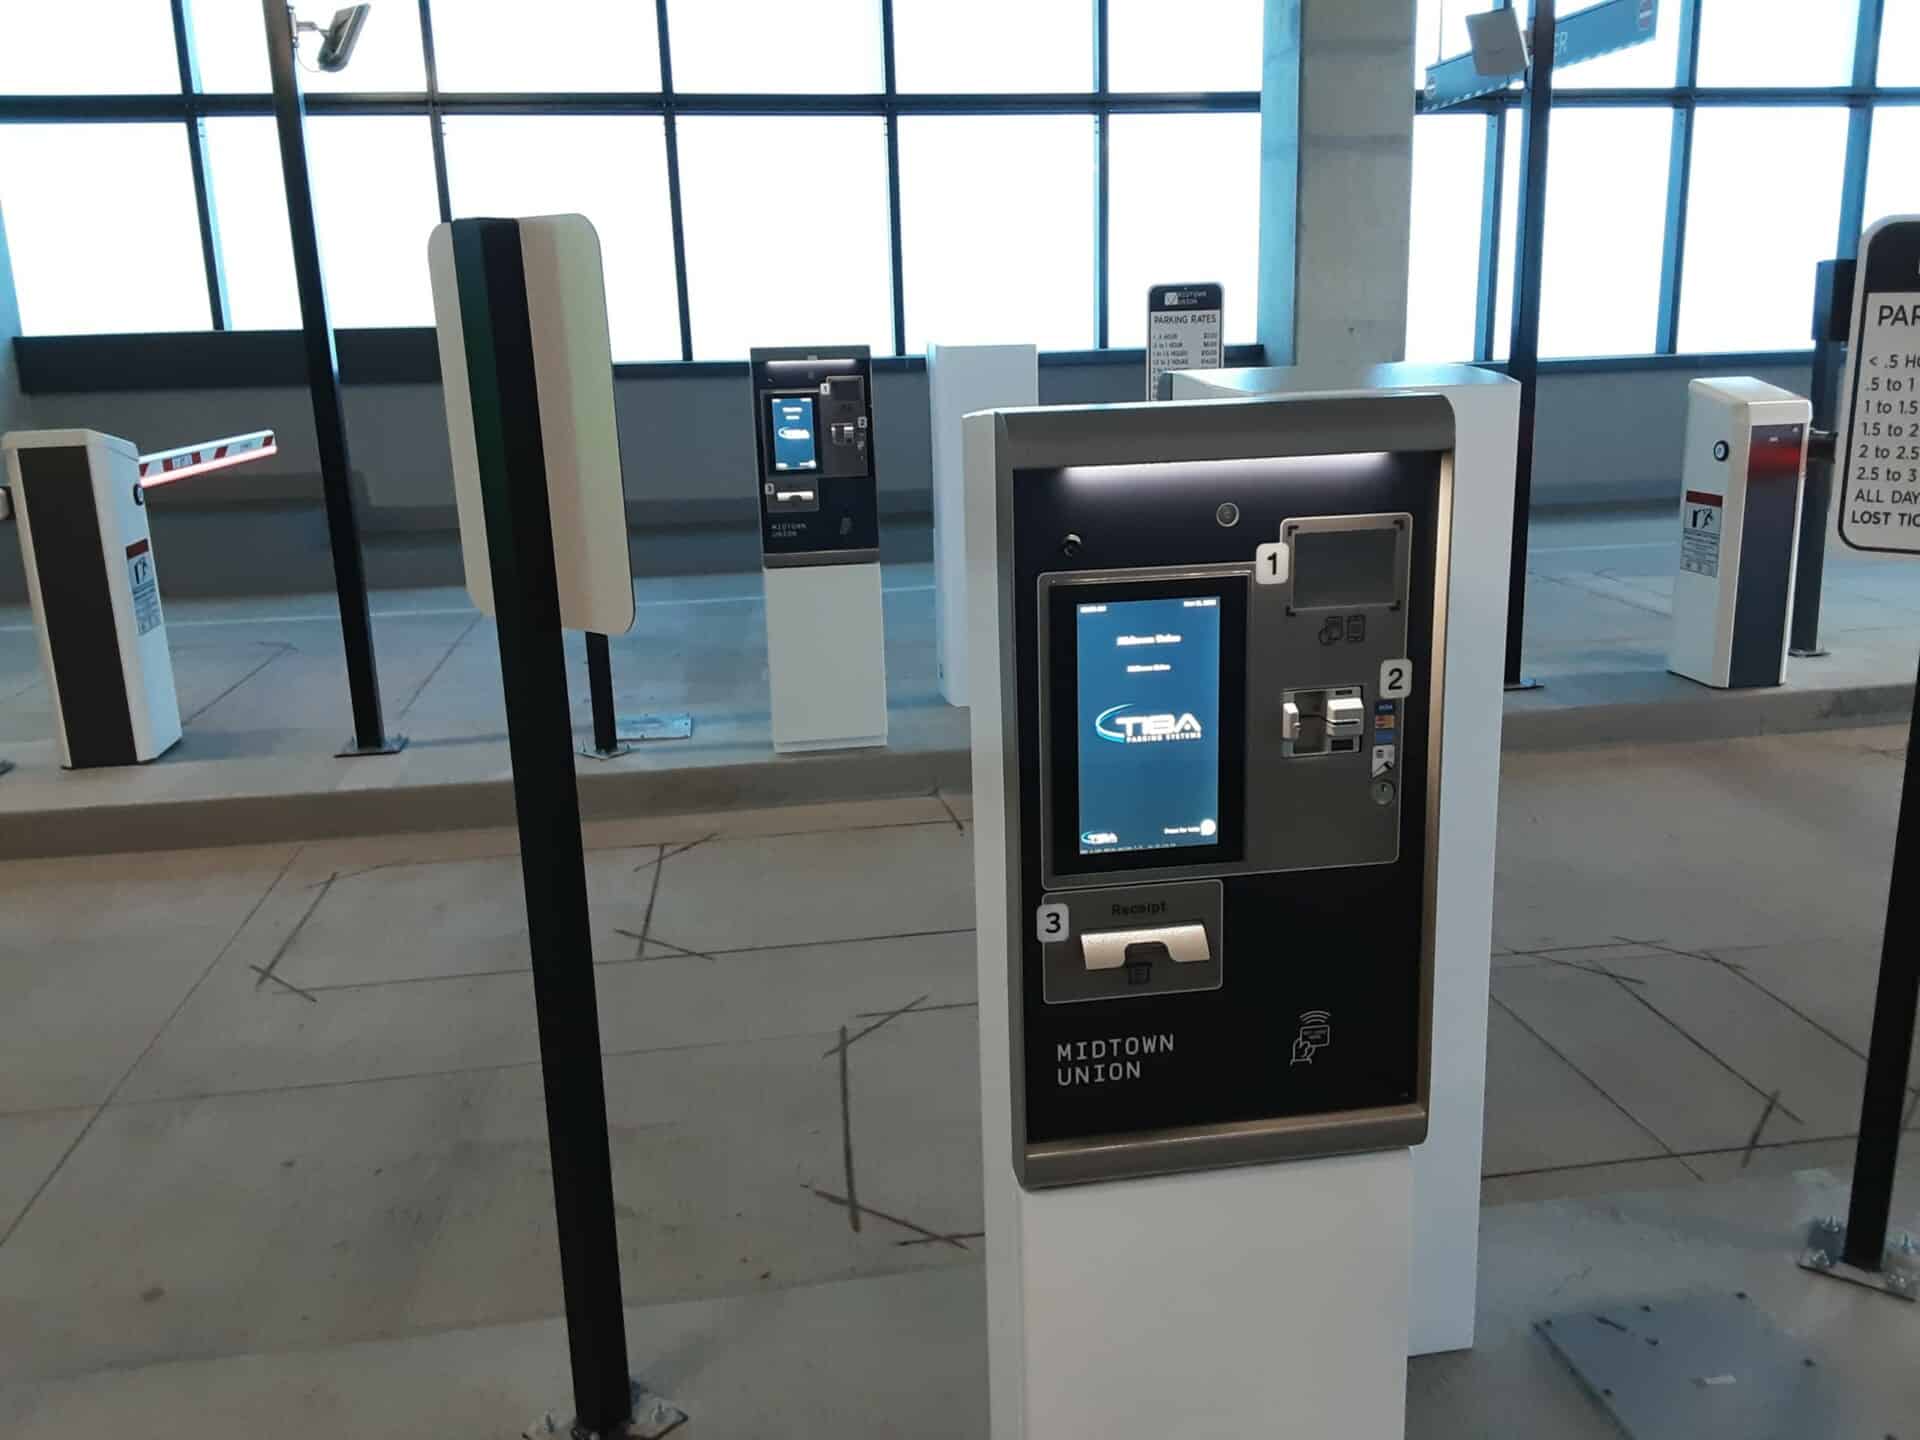 Secure parking ticket meter pay stations.